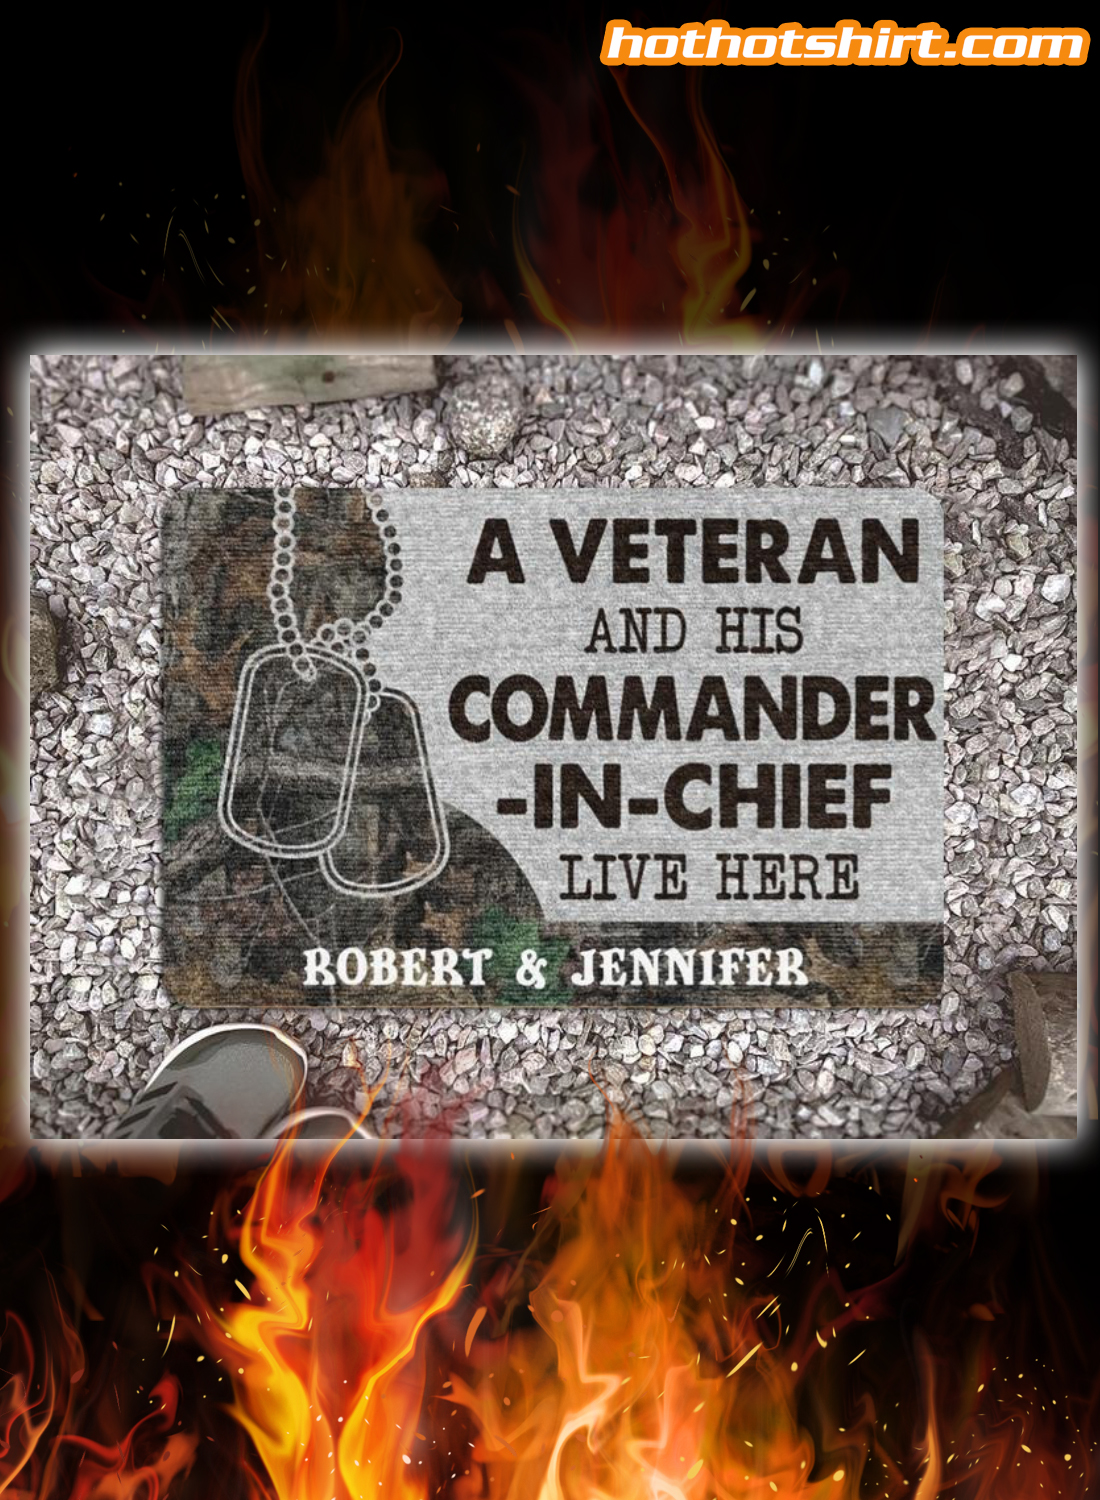 Personalized A veteran and his commander in chief live here doormat